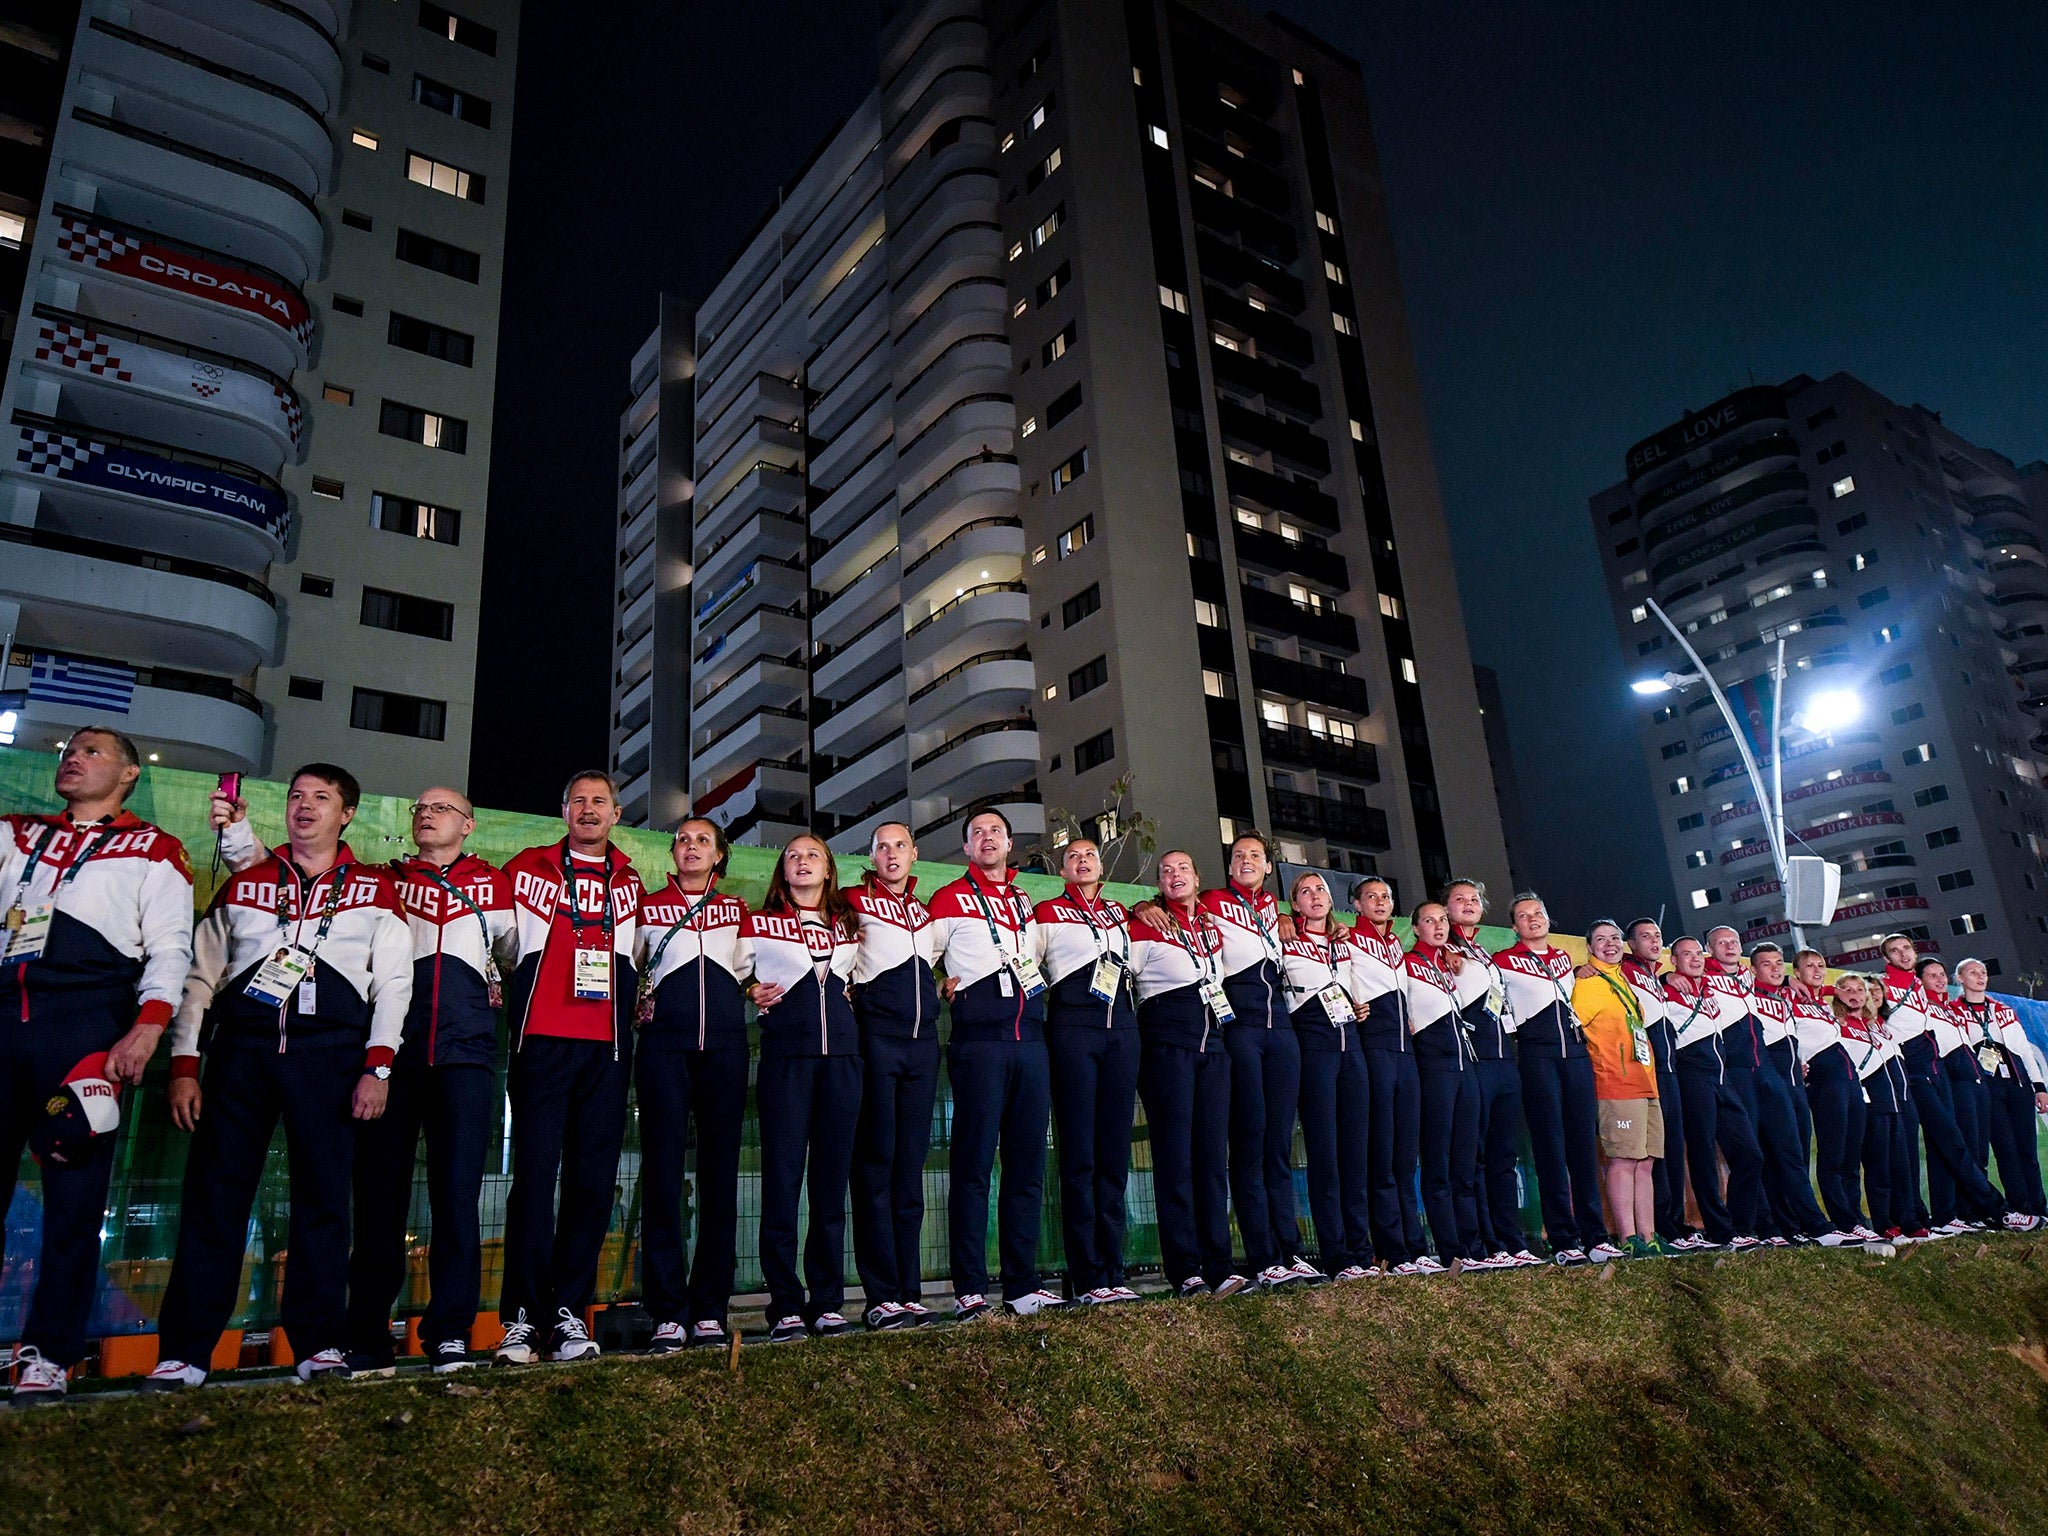 Russian athletes attend their official welcome ceremony to Rio de Janeiro